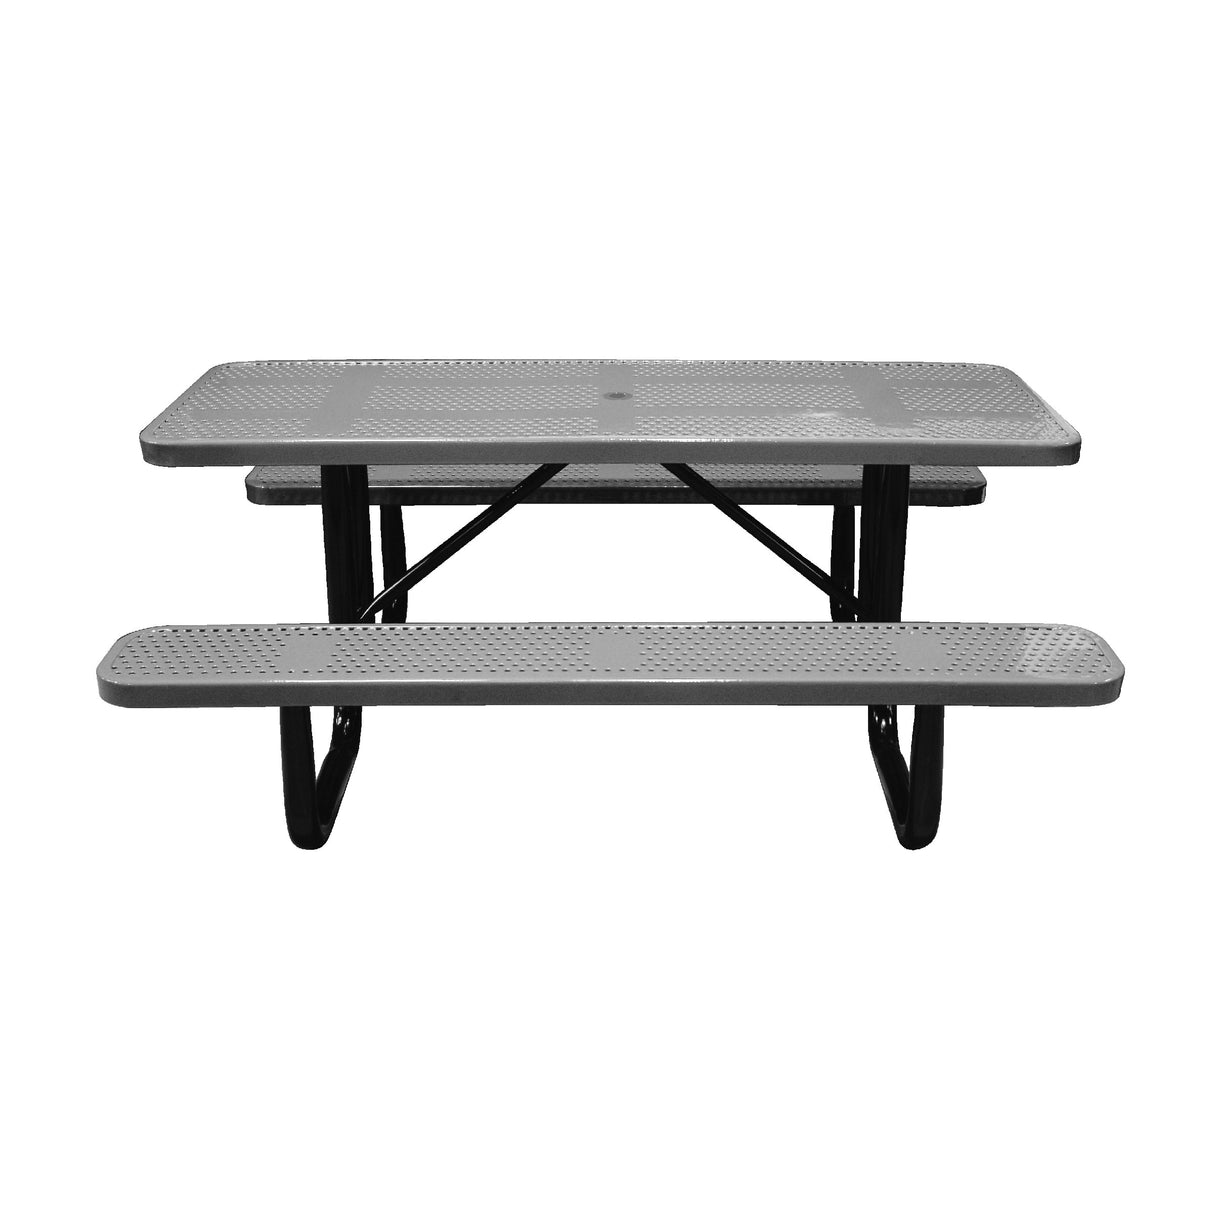 Standard Perforated Picnic Tables